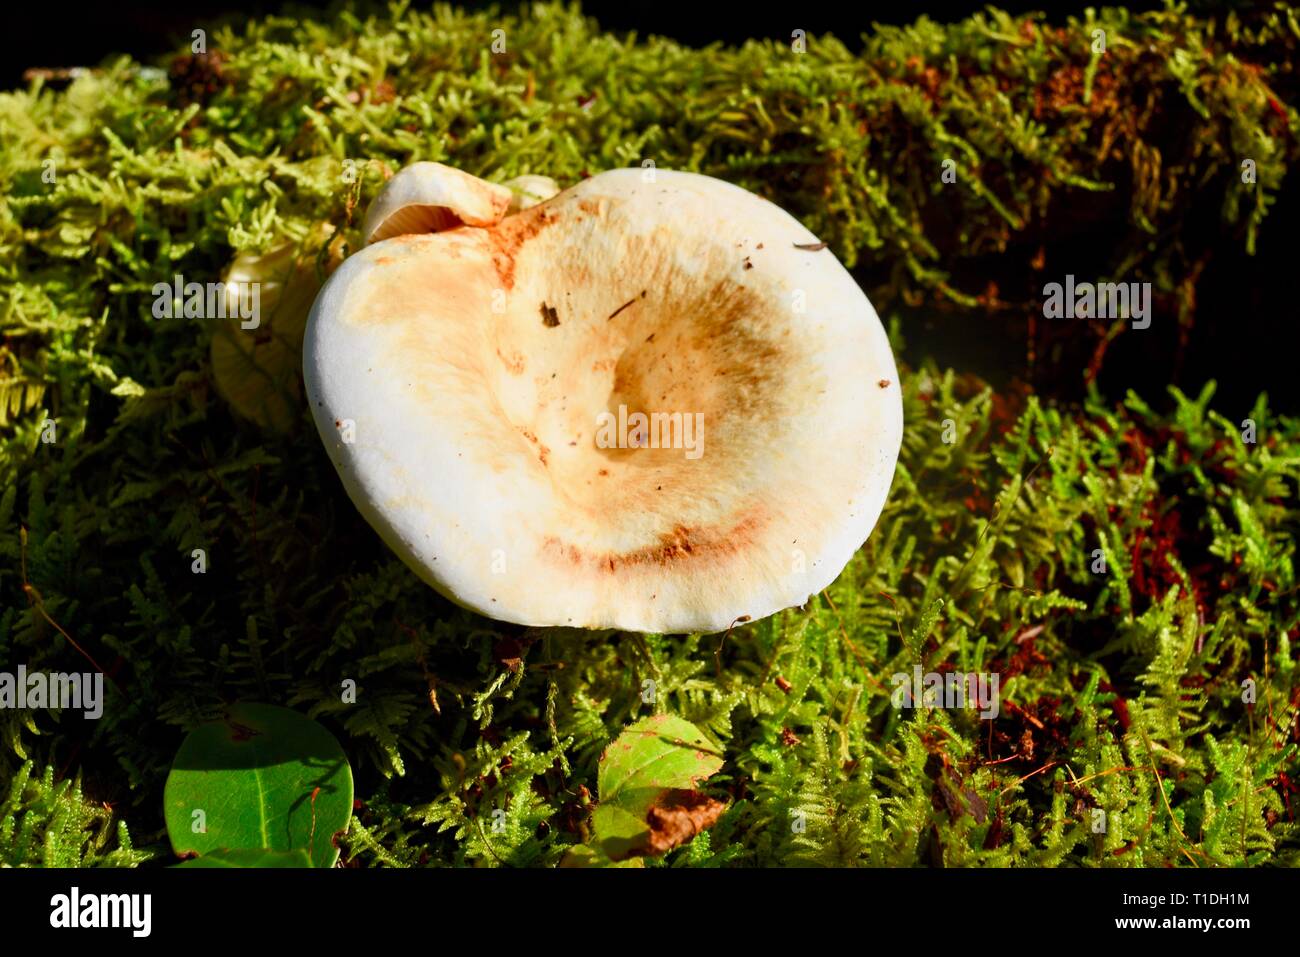 A wild mushroom on forest floor discovered while hiking on trails around John Rock, Pisgah National Forest, North Carolina, USA Stock Photo